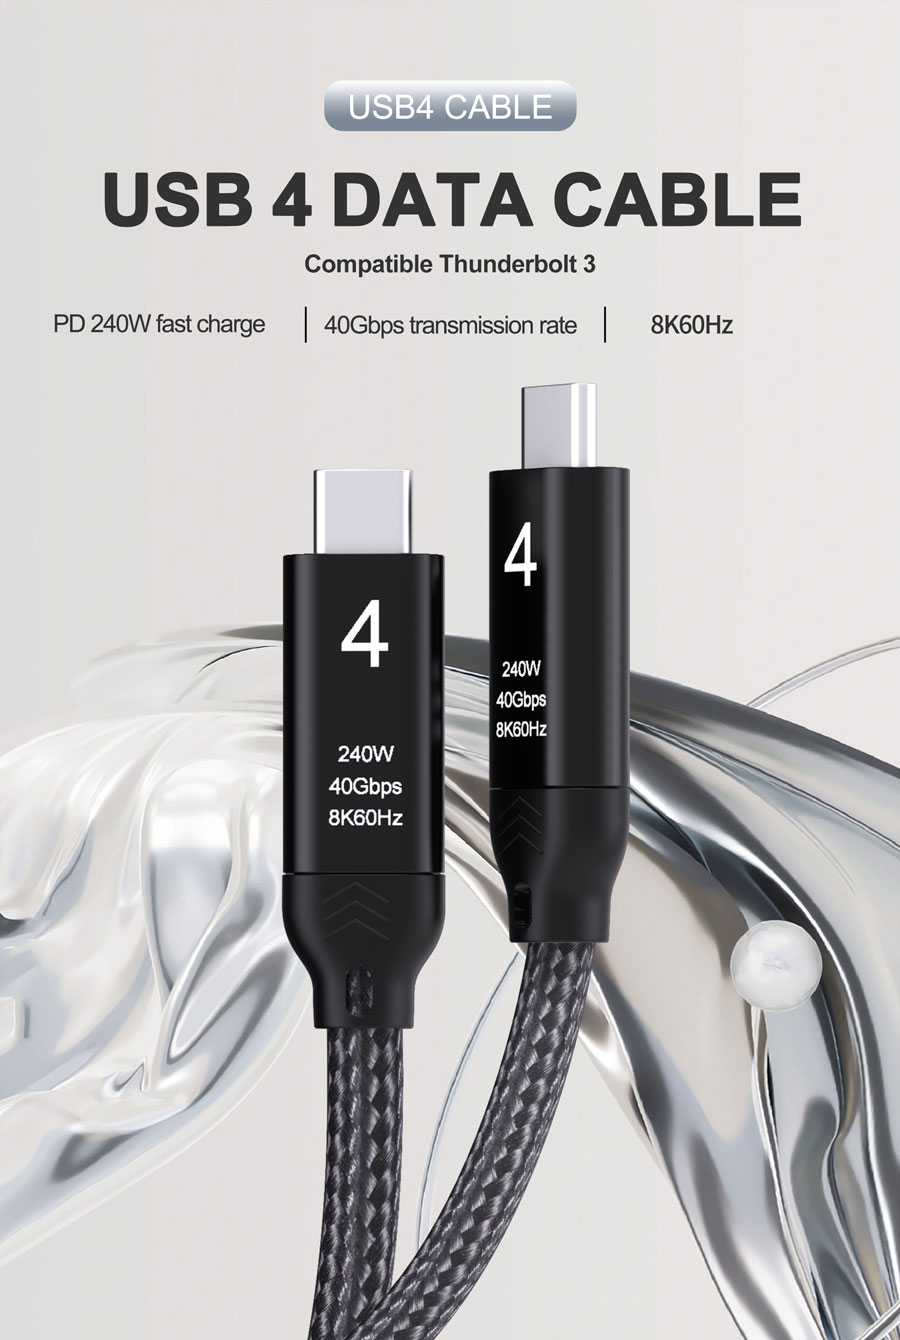 Usb4 data cable